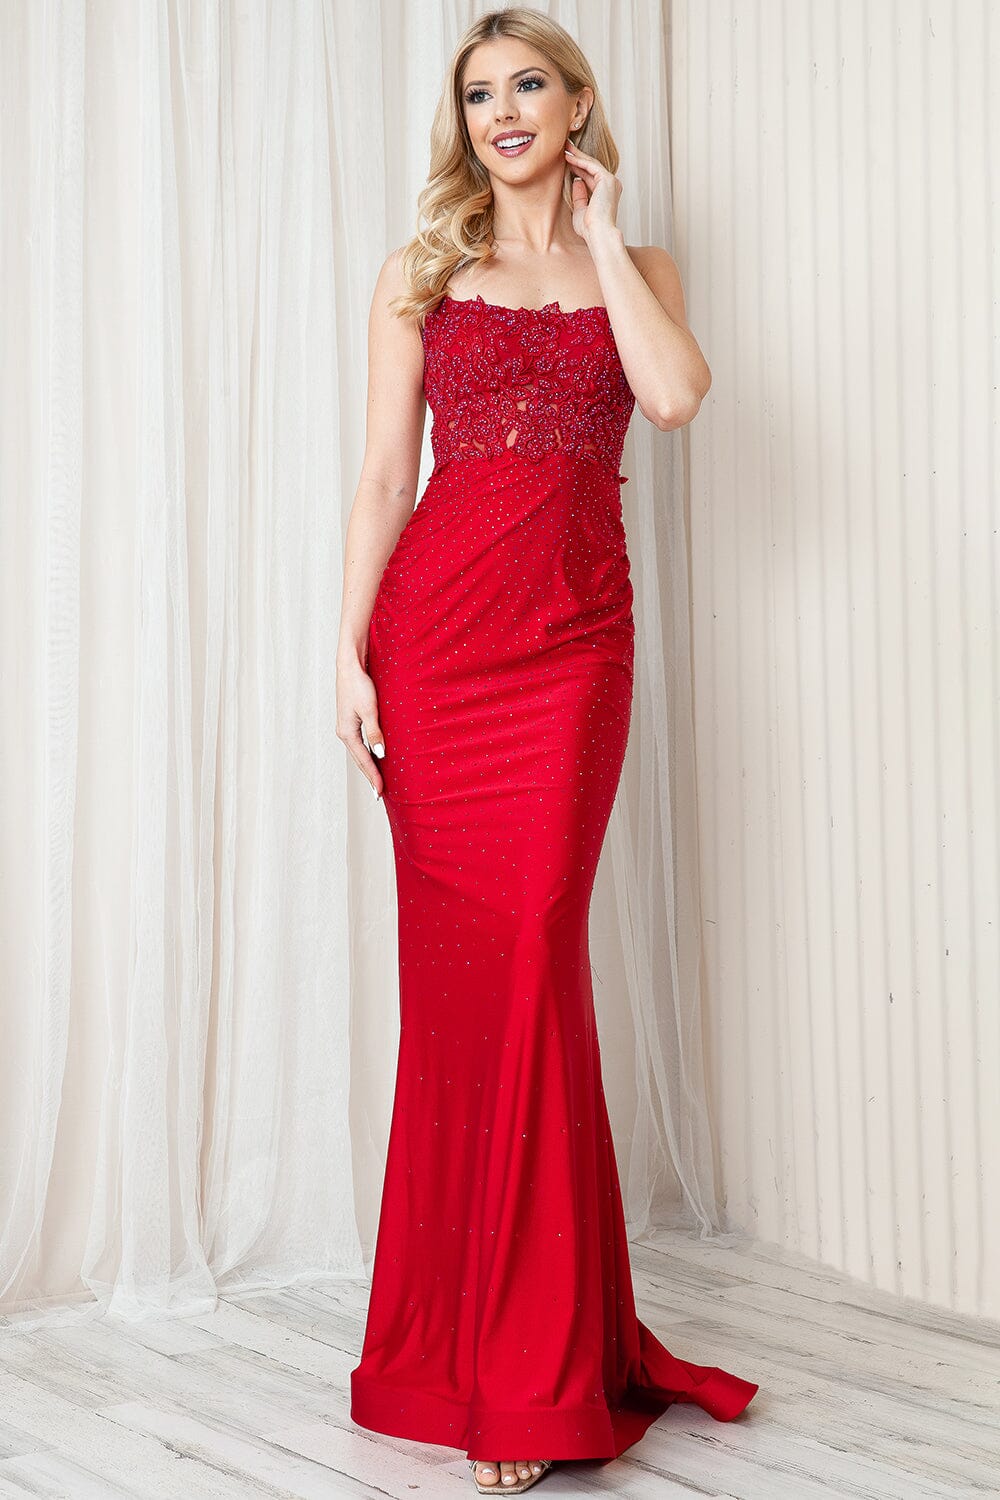 Beaded Applique Sleeveless Gown by Amelia Couture TM1001